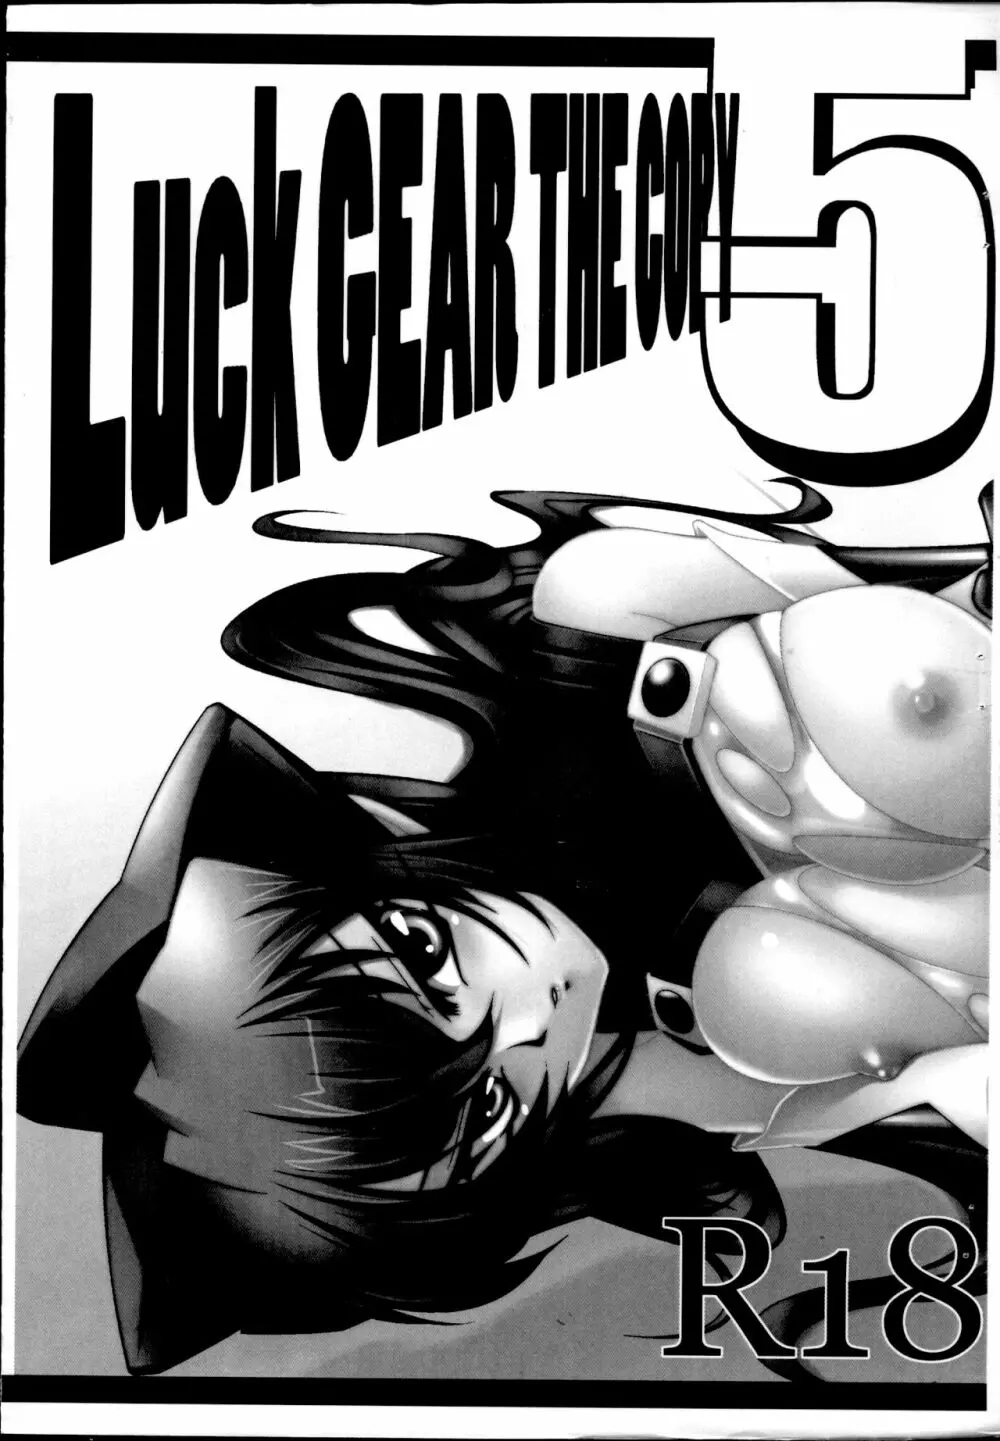 Luck GEAR THE COPY 5 Page.1